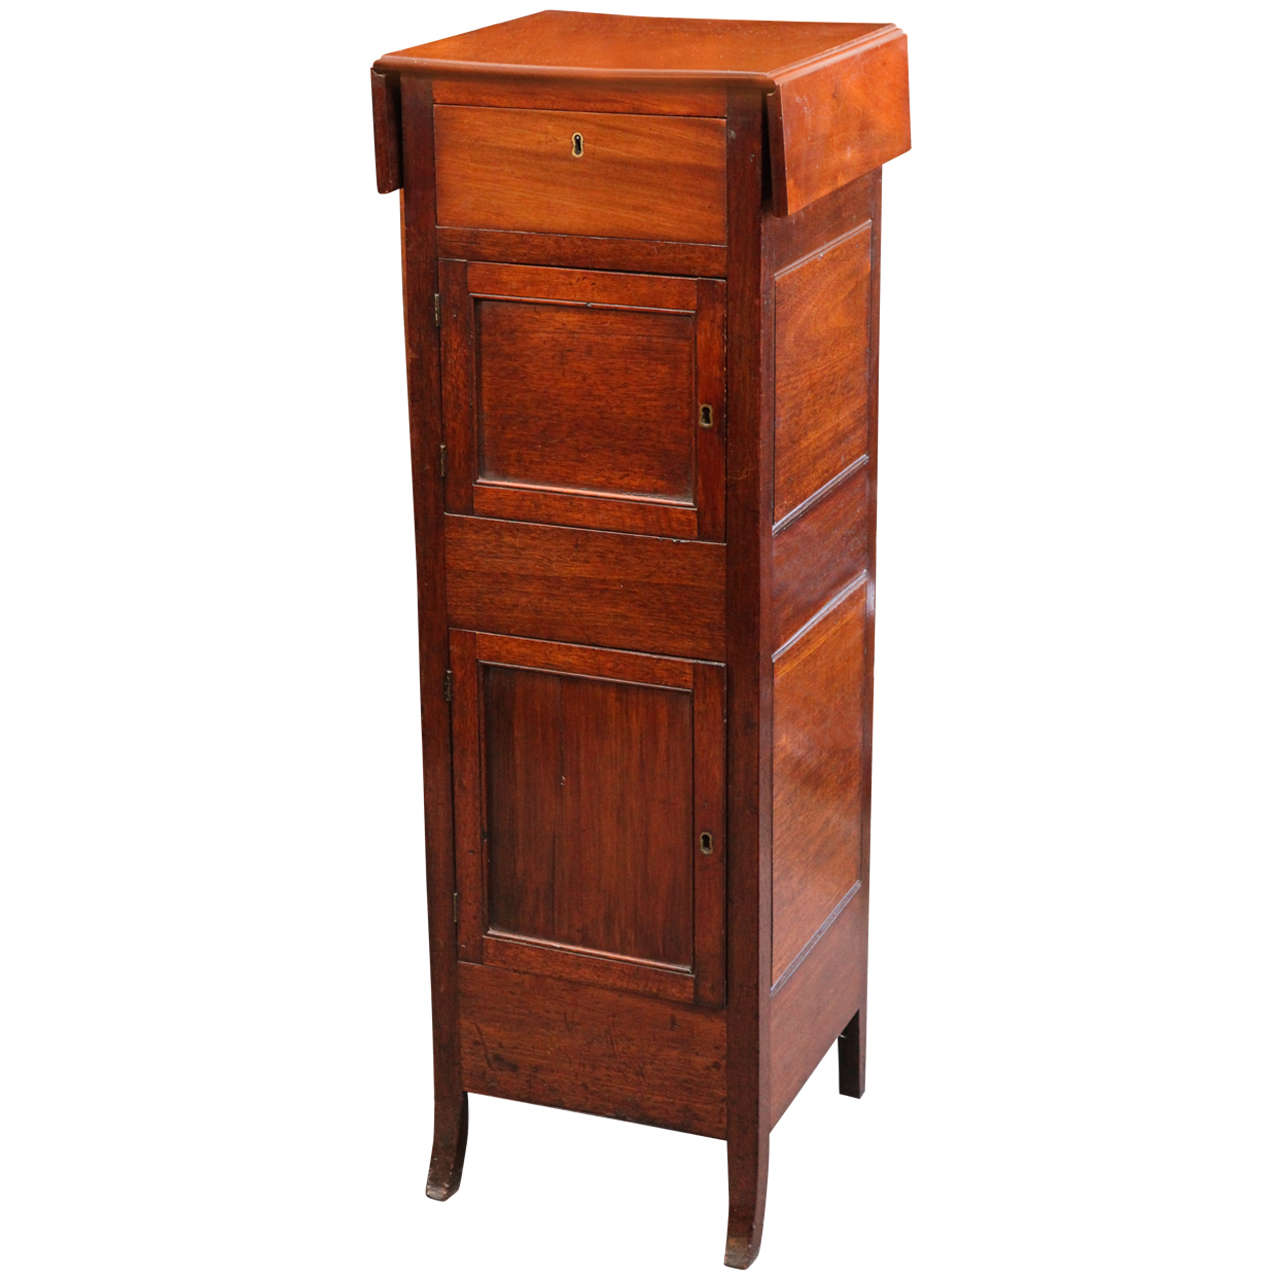 19th c. Tall Jewelers Cabinet in Mahogany